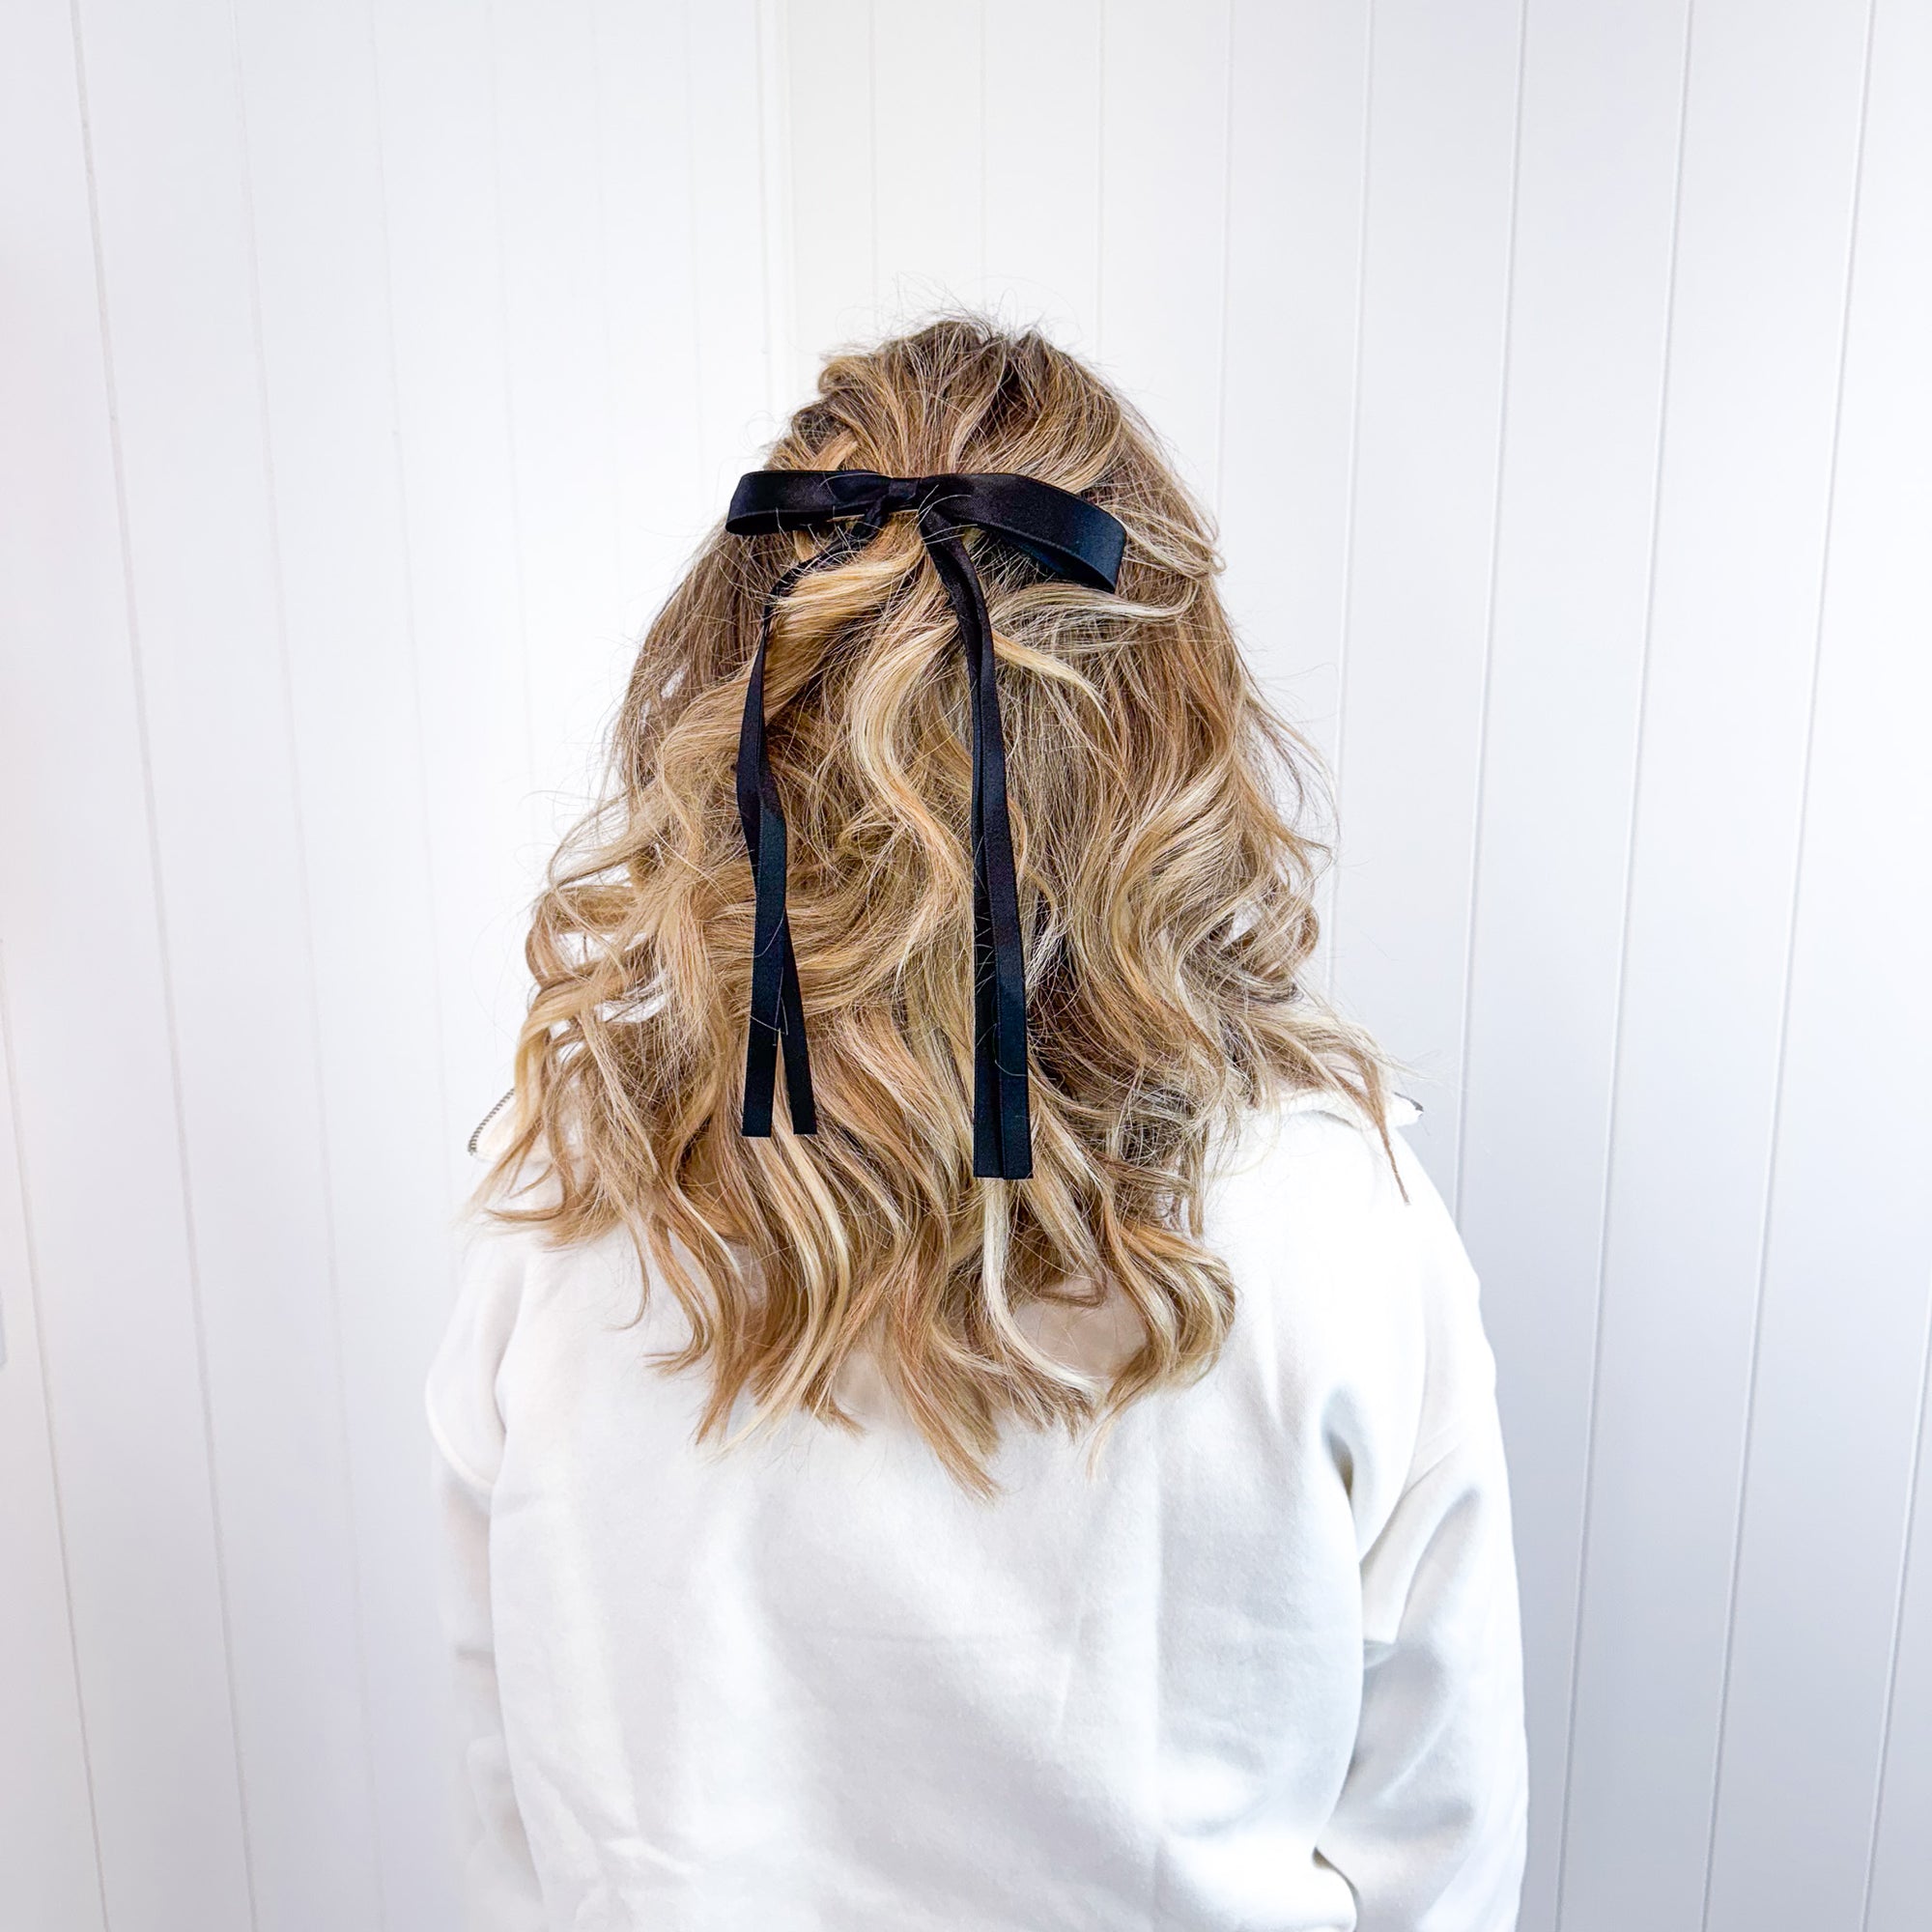 Soft Girly Era Clip on Bow in 5 Colors - Boujee Boutique 